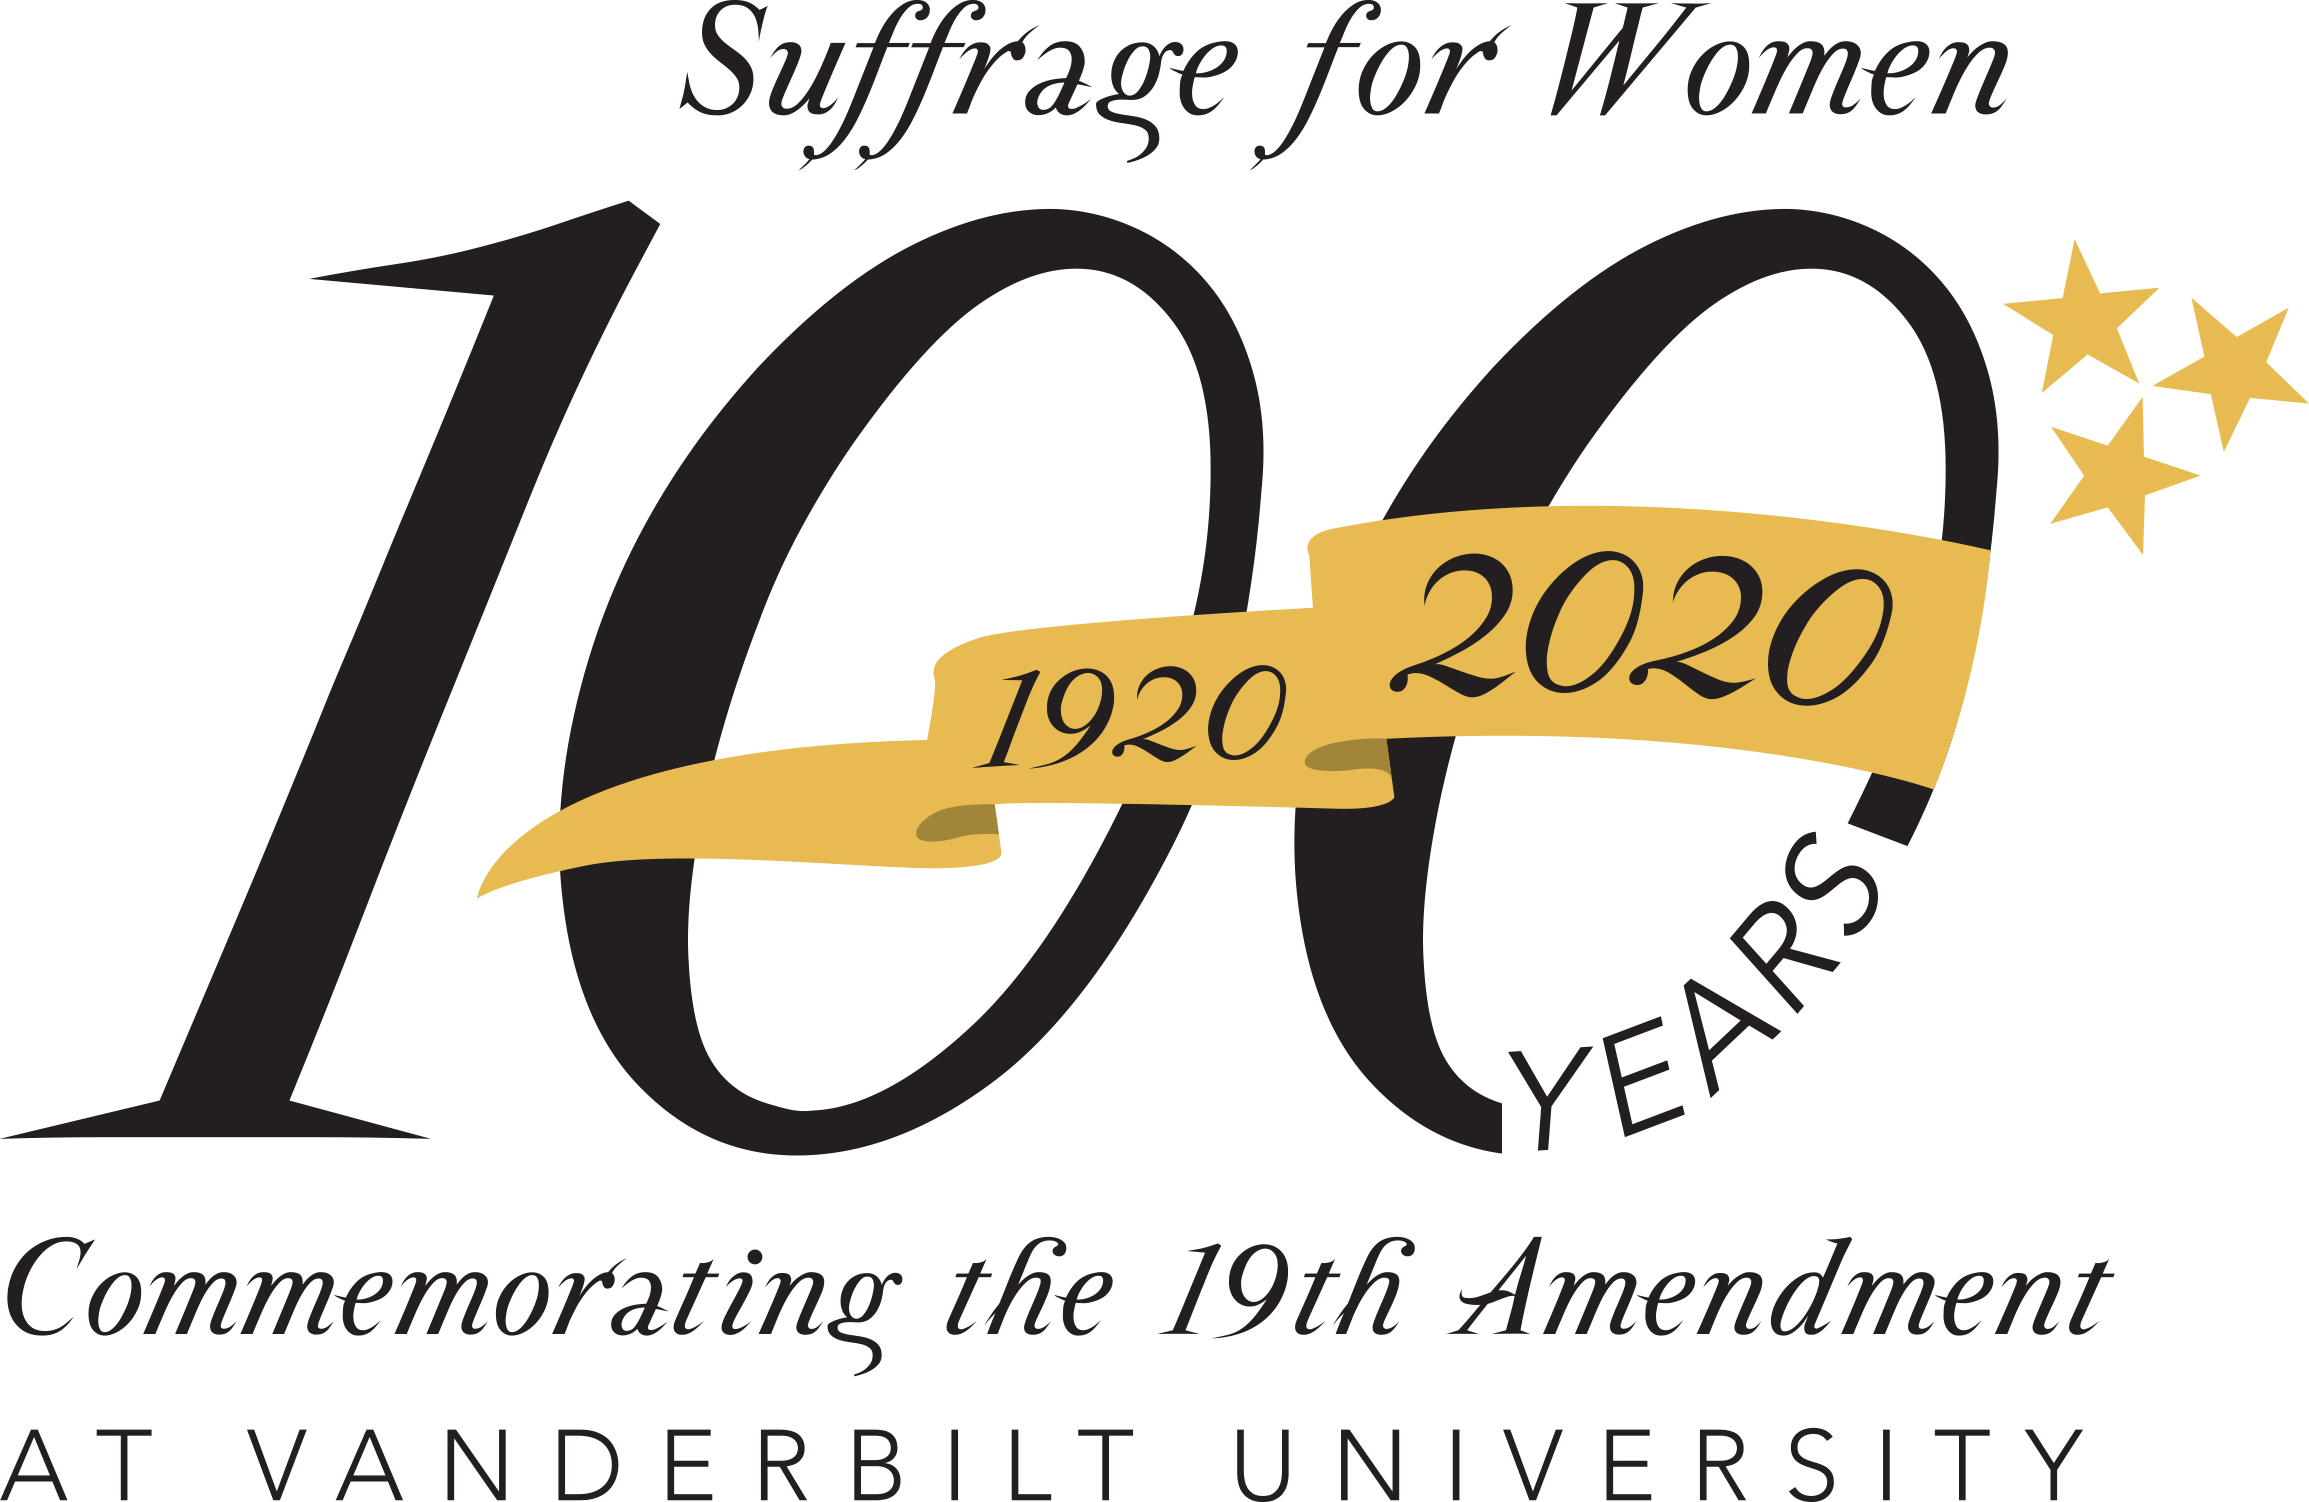 Suffrage for Women. 100 years (1920-2020) Commemorating the 19th Amendment at Vanderbilt University